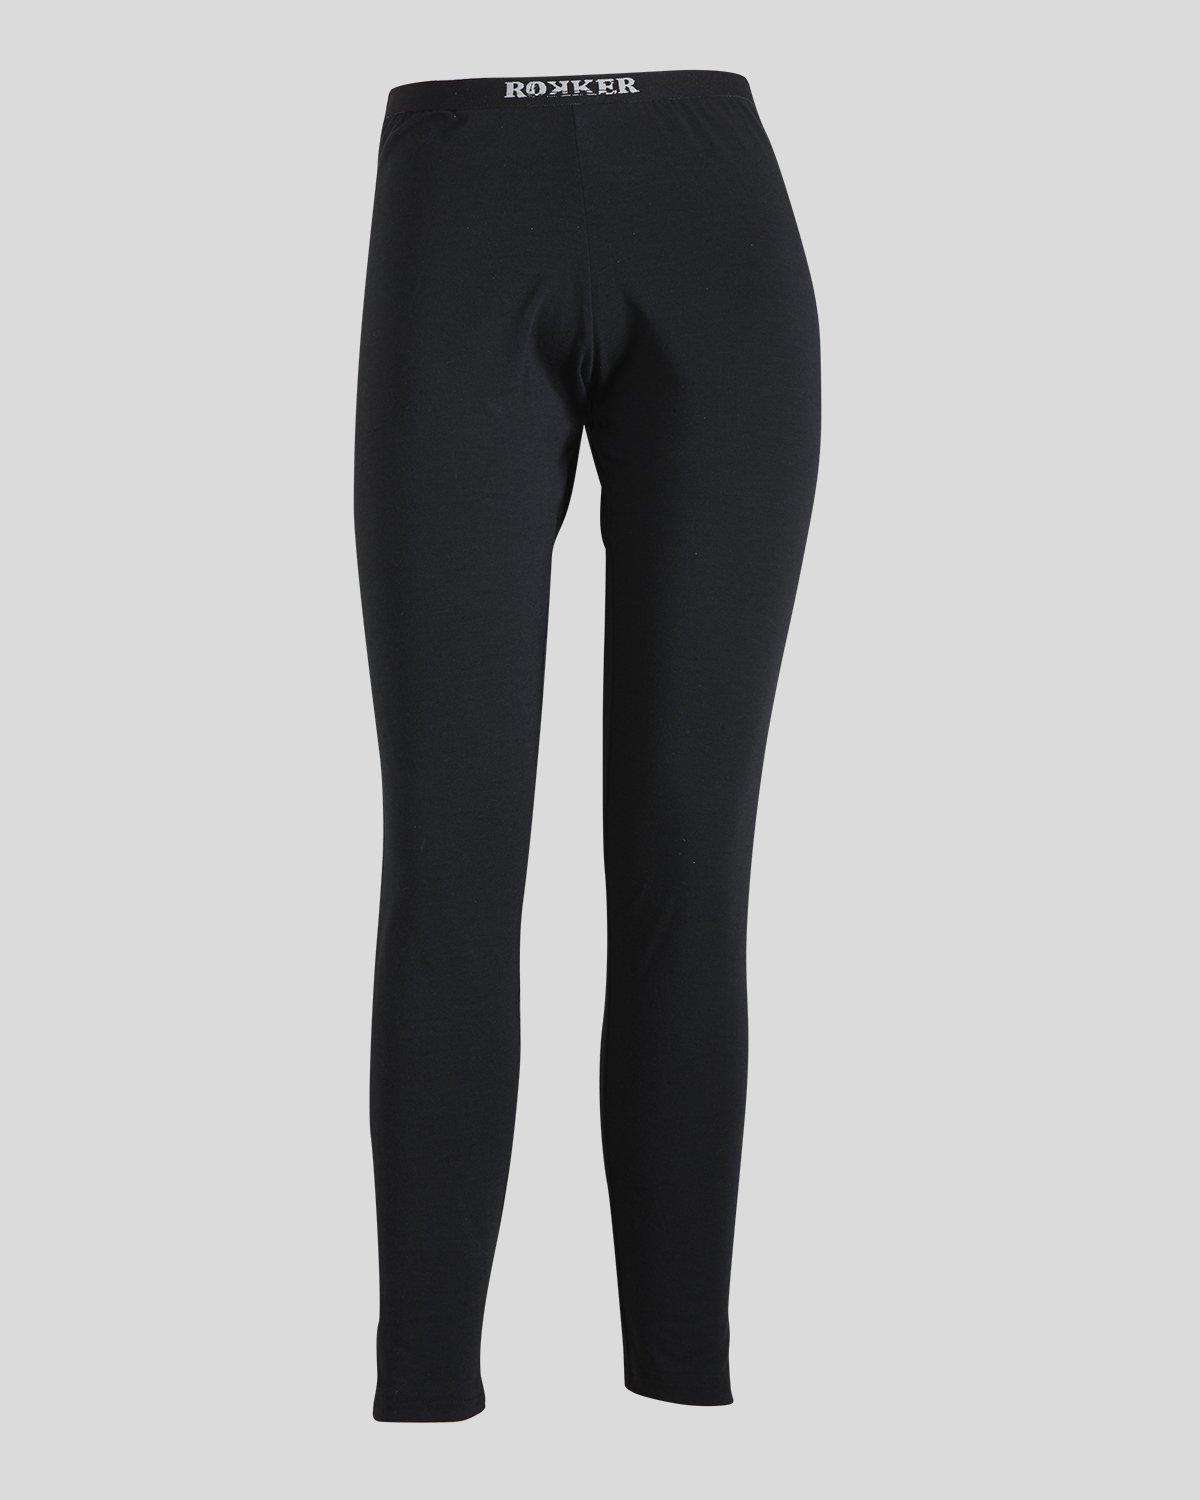 Performance Long Tights Underwear The Rokker Company 